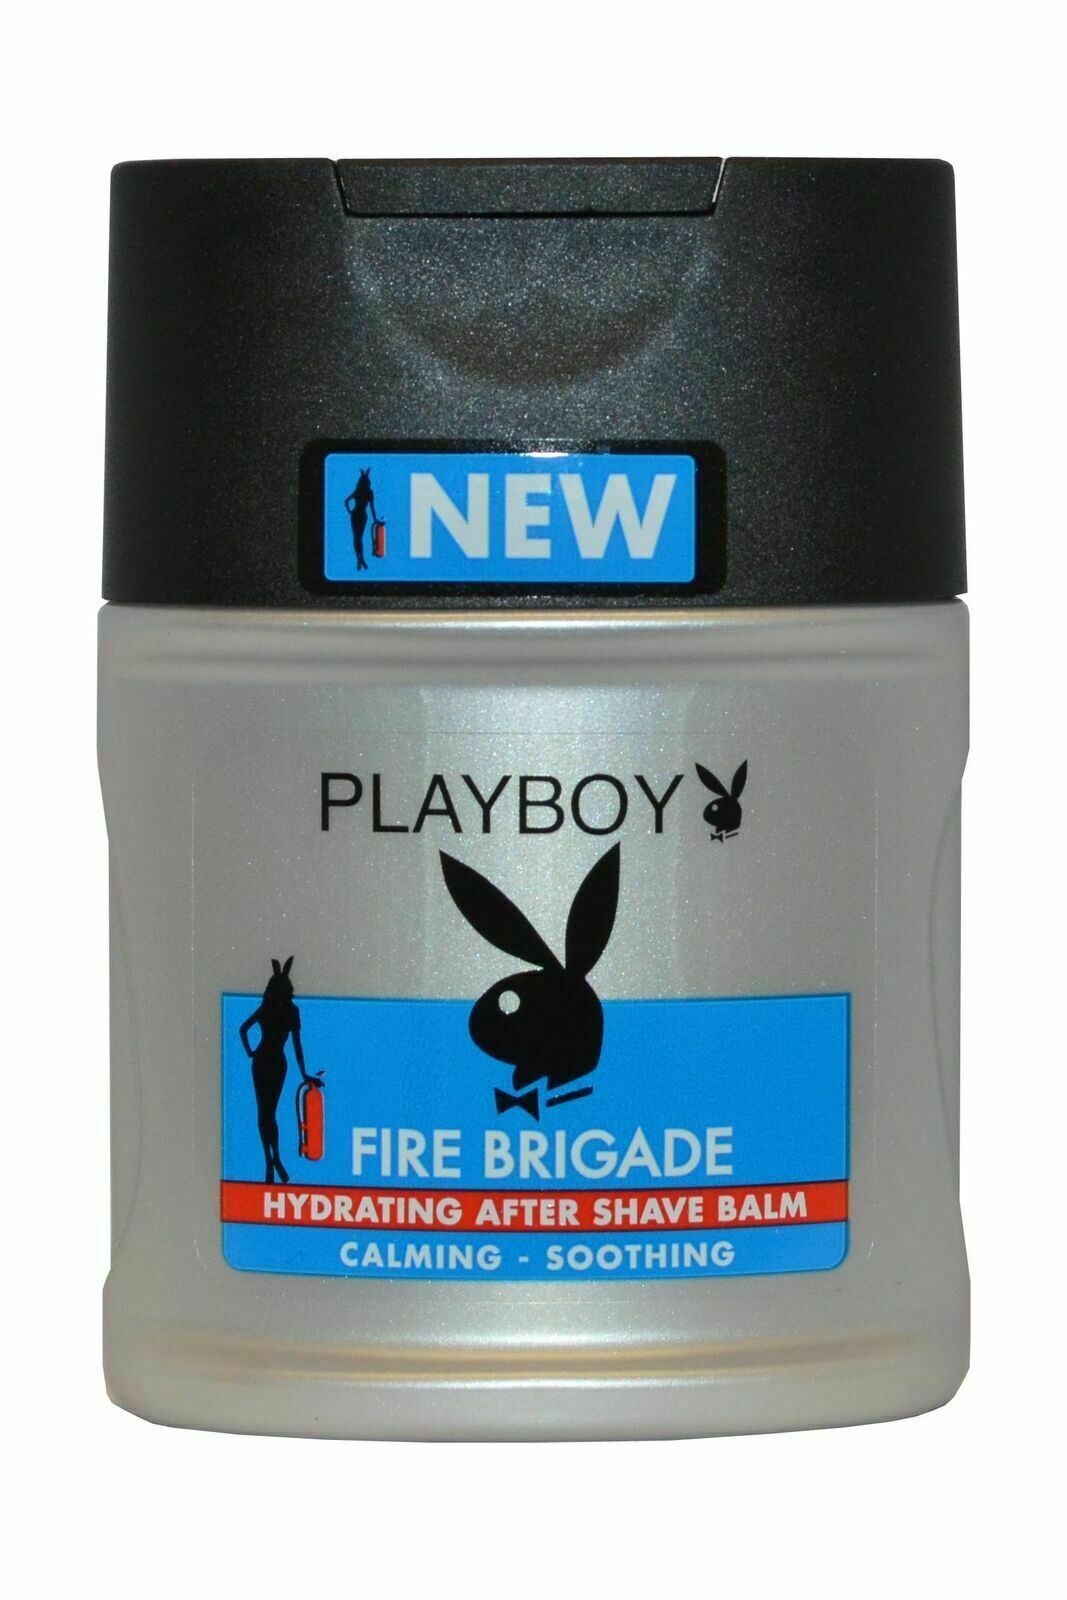 Playboy Fire Brigade Hydrating After Shave Balm 100ml RRP £4.99 CLEARANCE XL £3.99